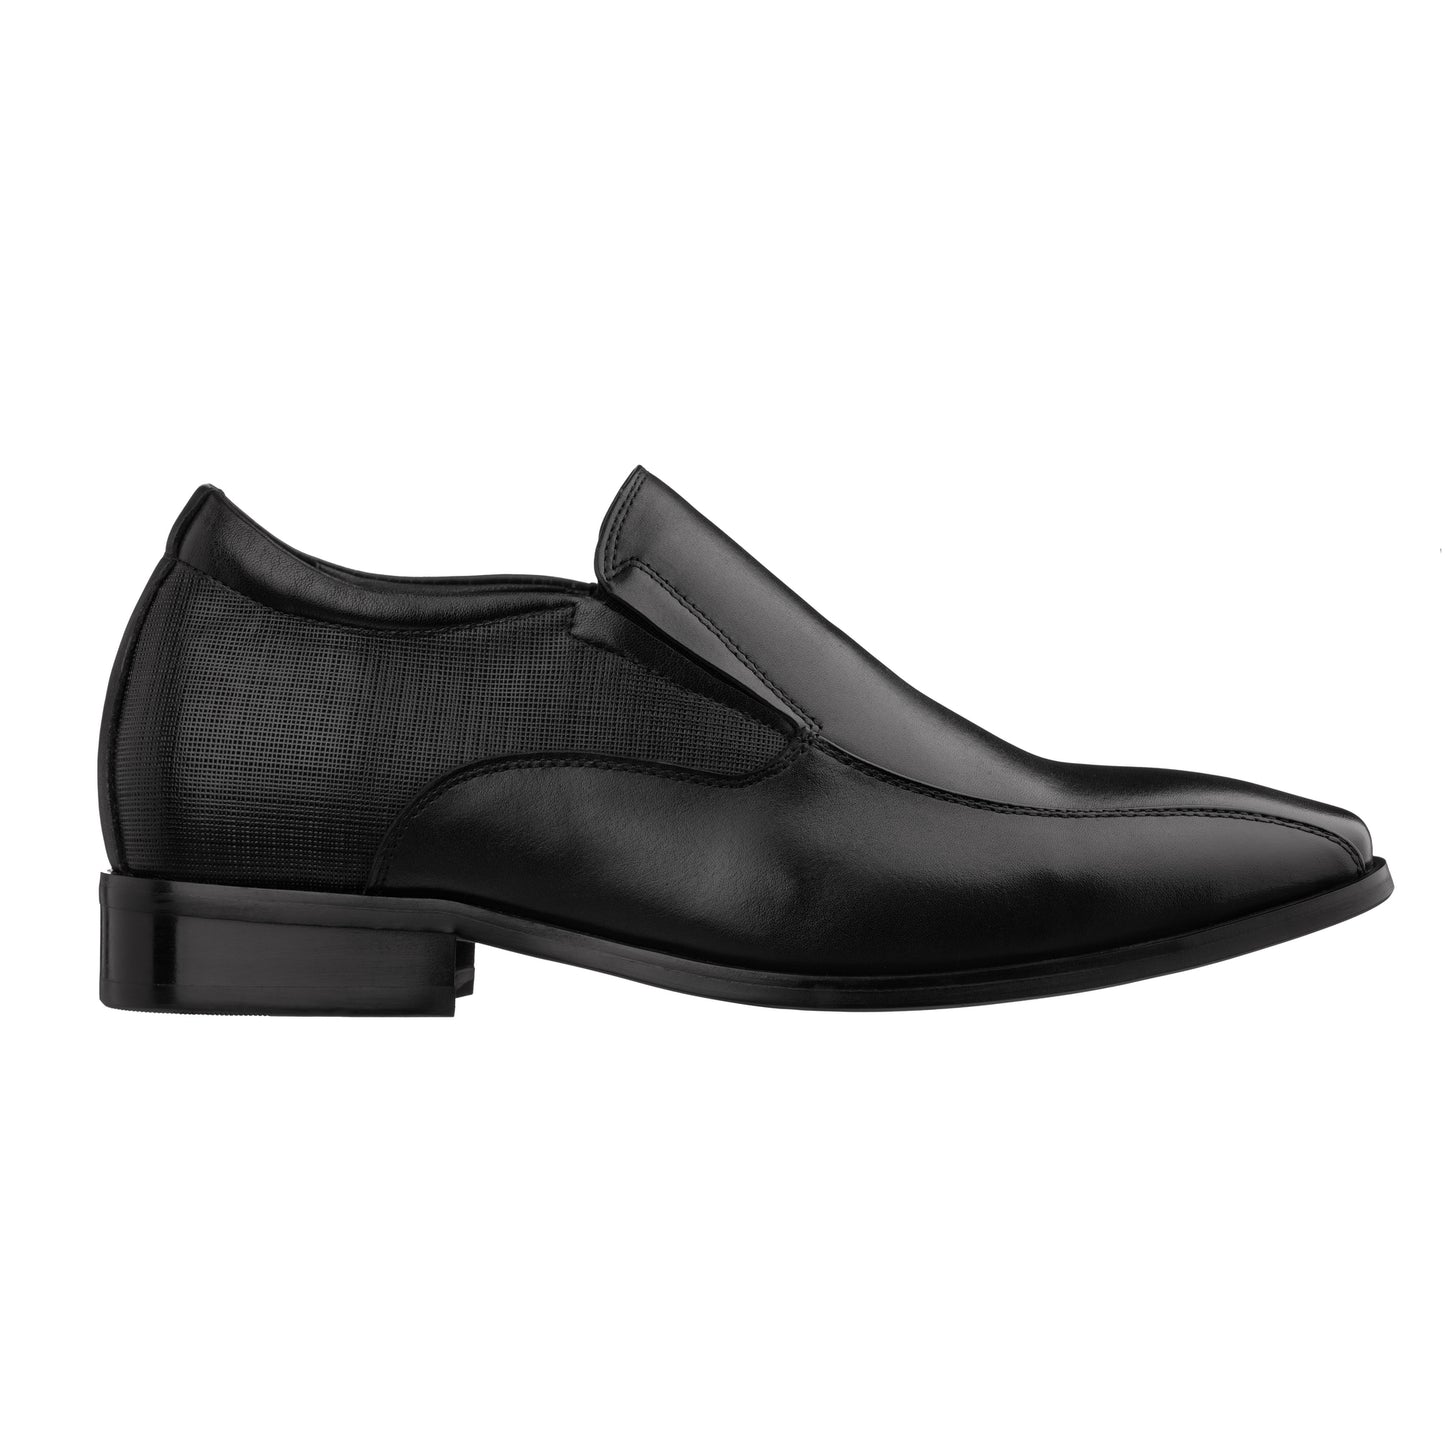 Elevator shoes height increase TOTO - Y6361 - 2.2 Inches Taller (Black) - Slip-On Dress Oxford